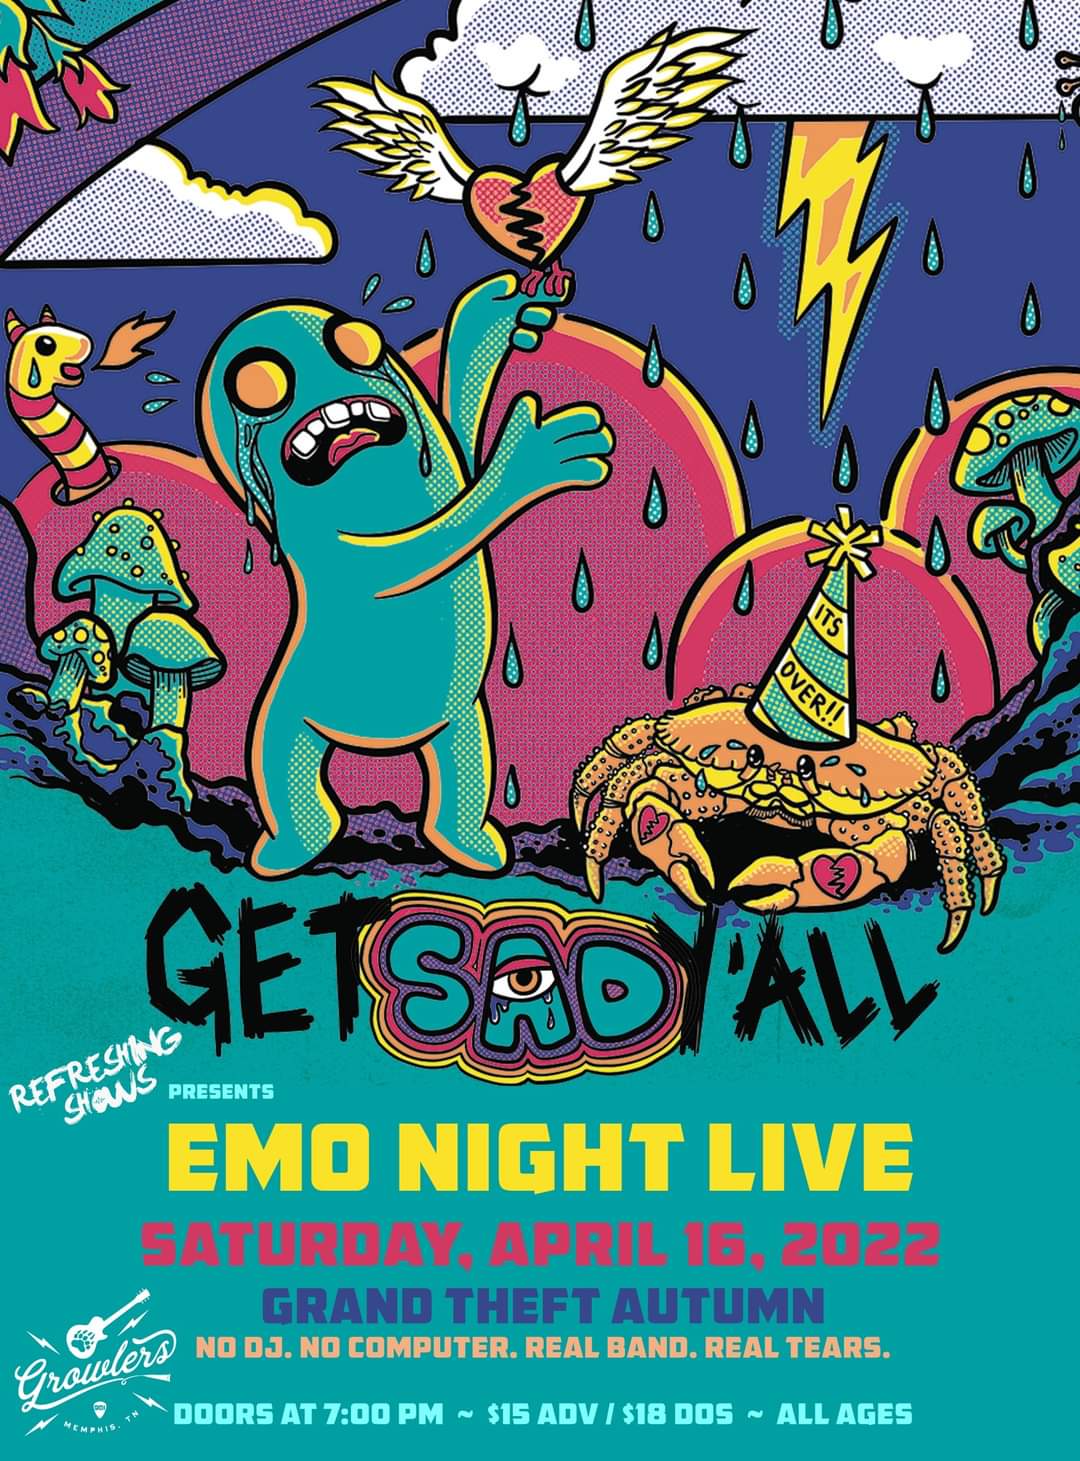 Buy Tickets to EMO NIGHT LIVE in Memphis on Apr 16, 2022